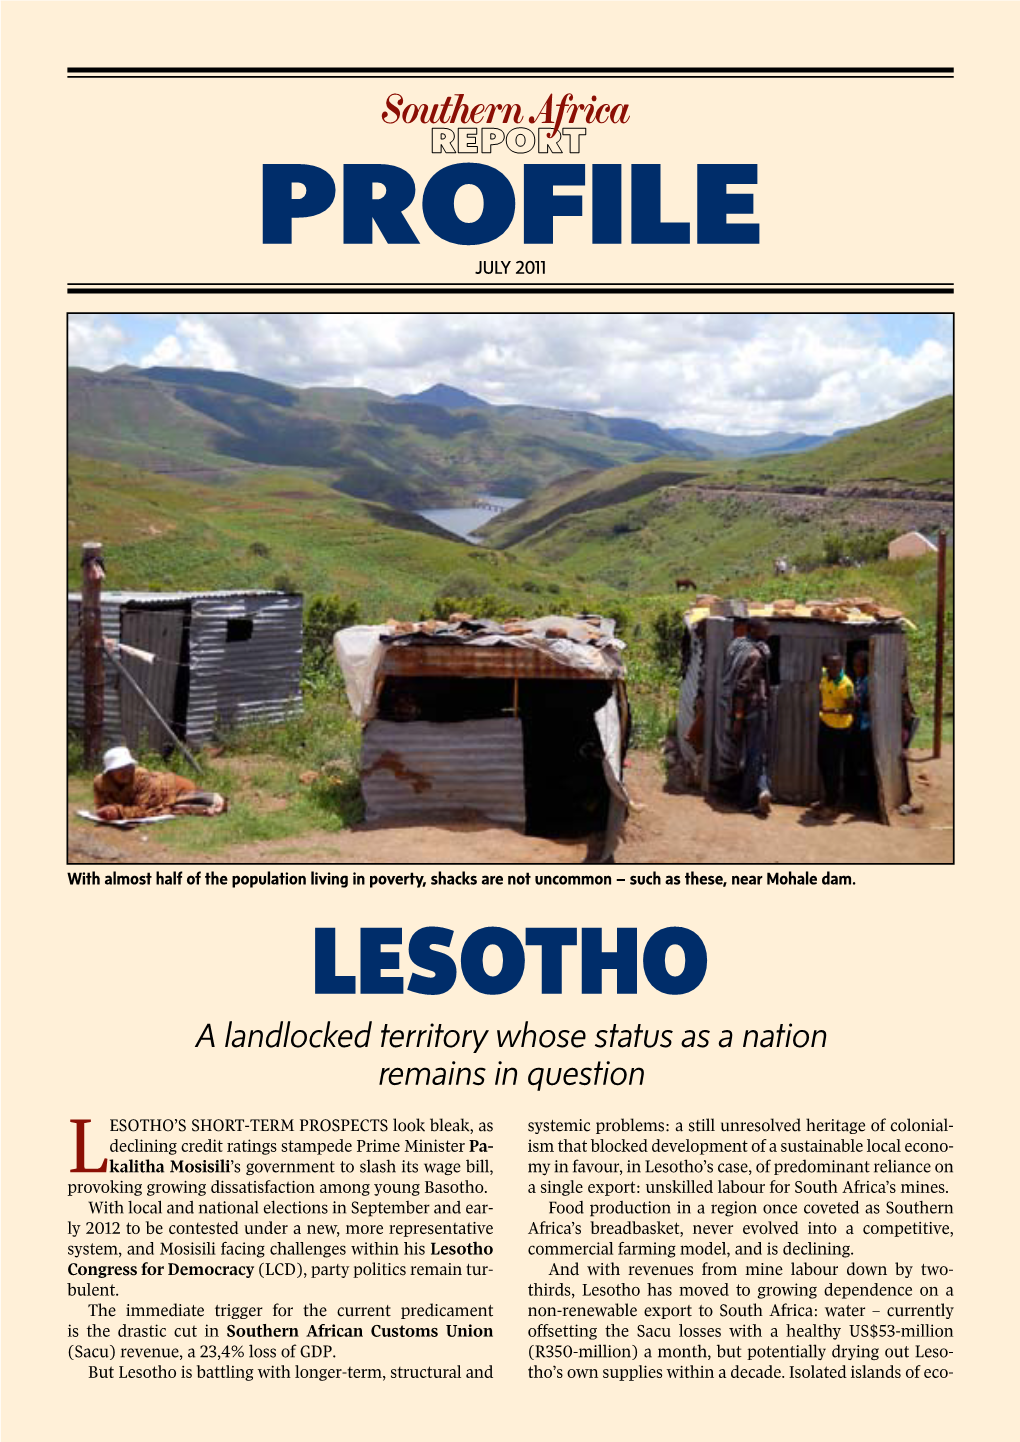 Lesotho a Landlocked Territory Whose Status As a Nation Remains in Question